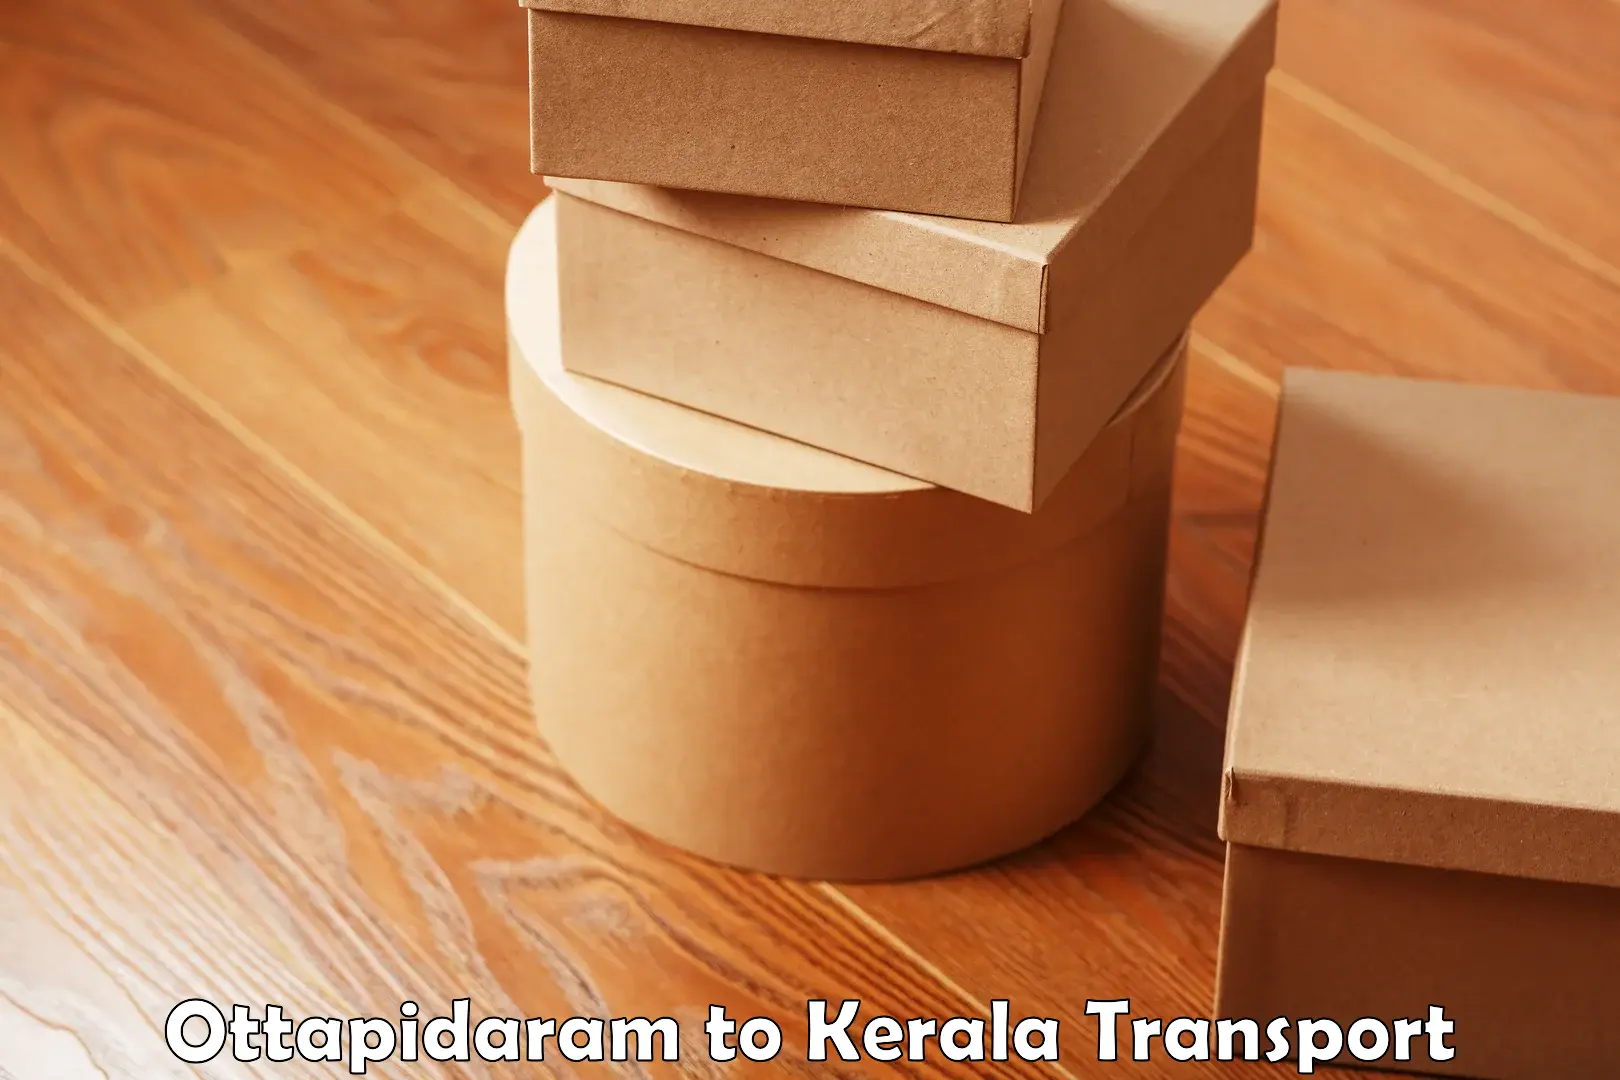 Domestic goods transportation services in Ottapidaram to Mananthavady